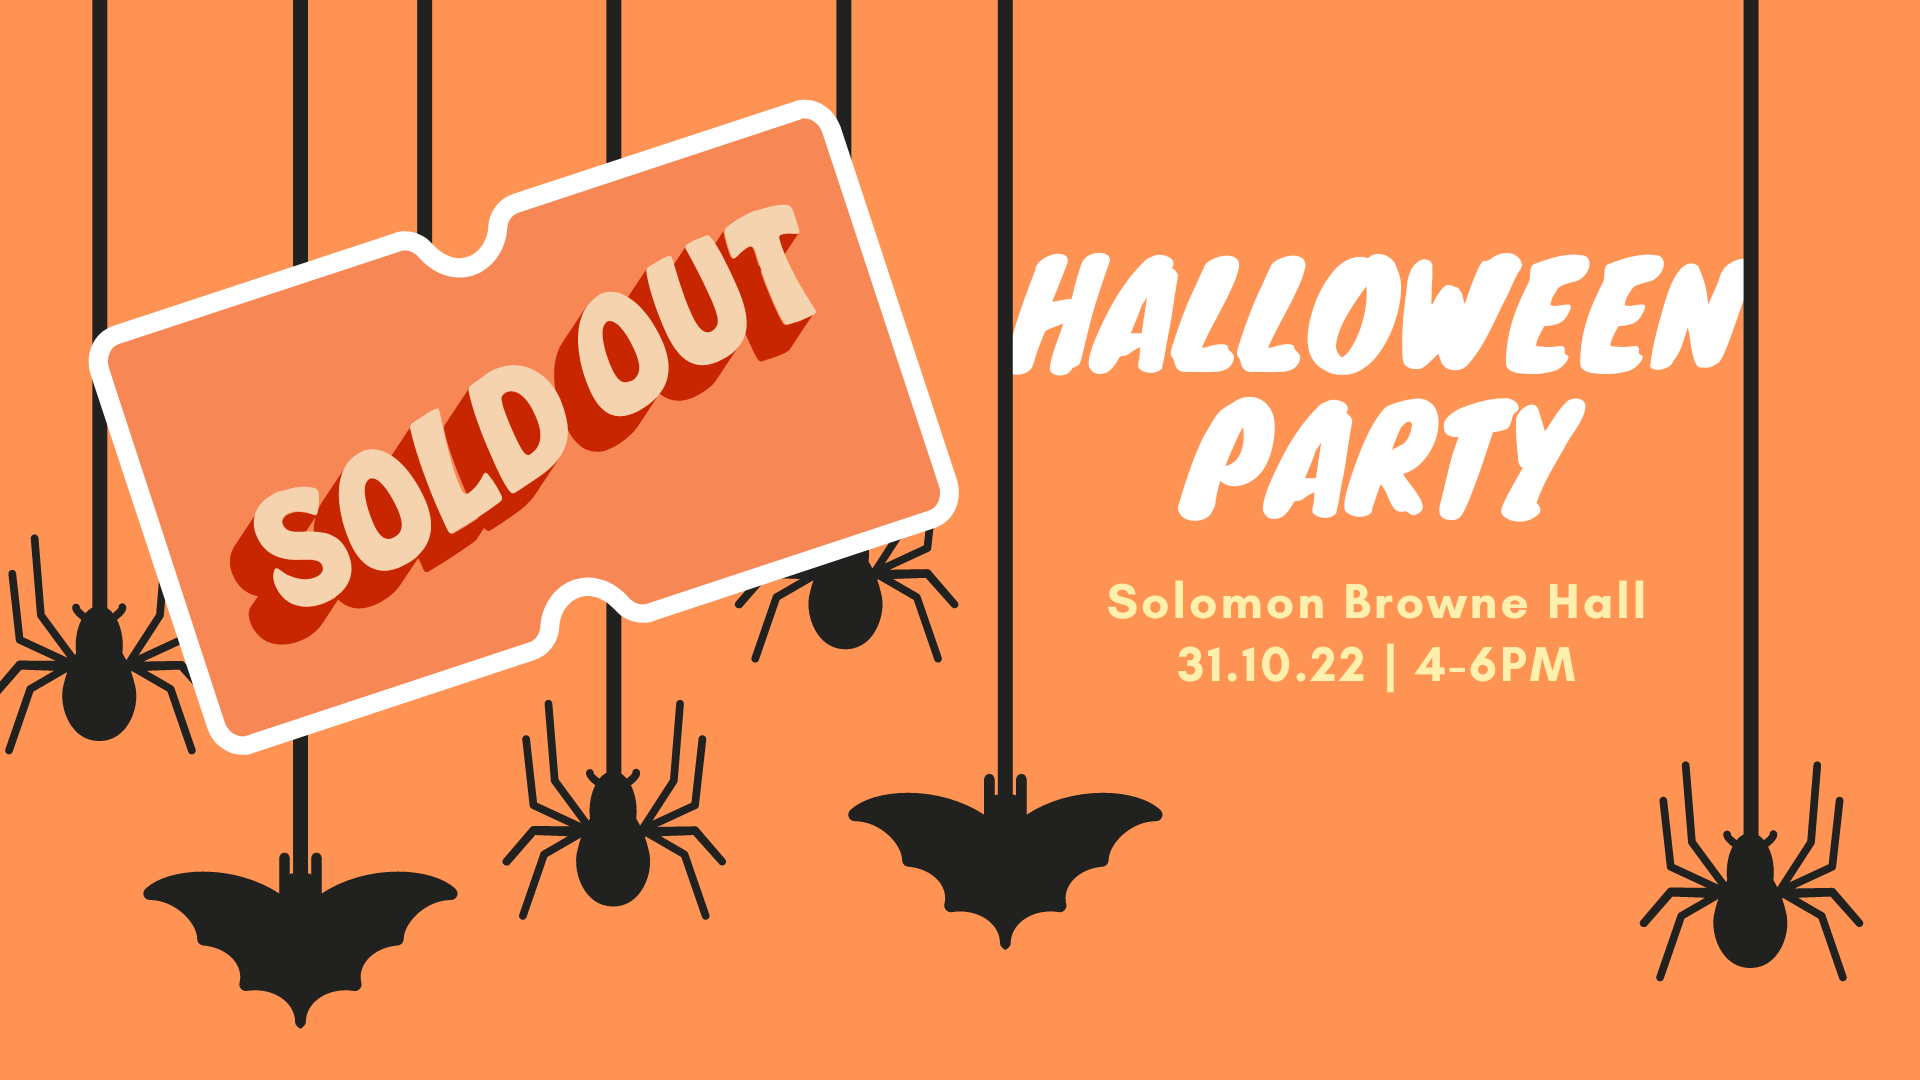 SOLD OUT - Halloween Party